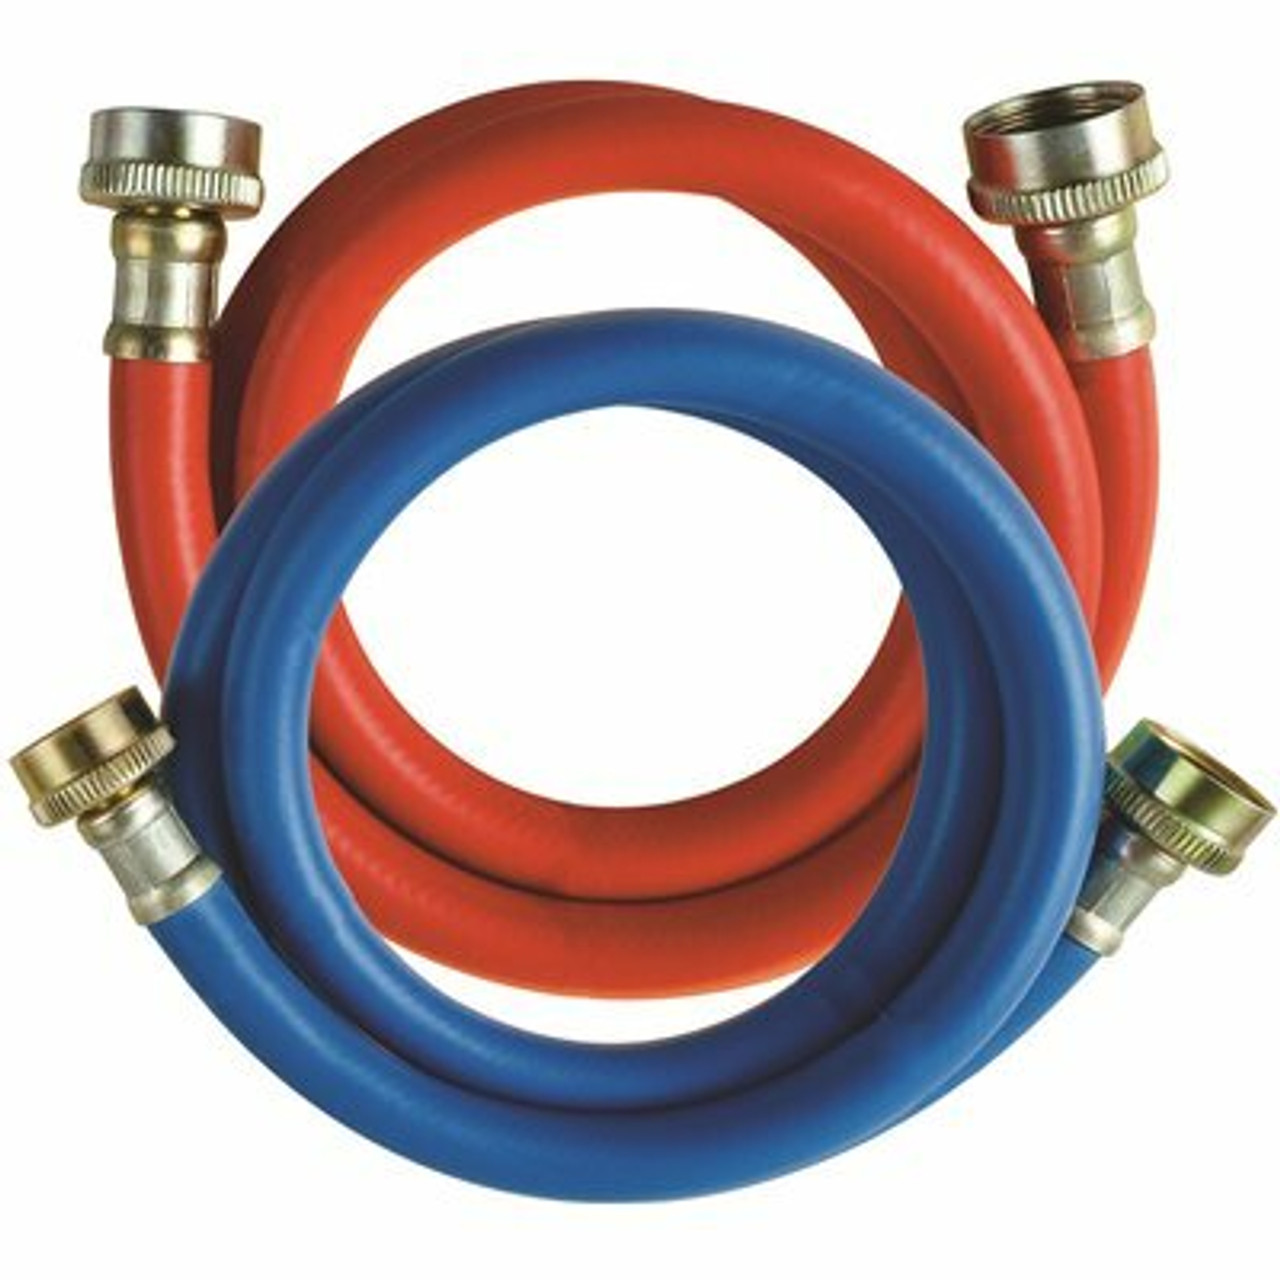 Durapro 4 Ft. Red And Blue Pvc Washing Machine Fill Hose (2-Pack)